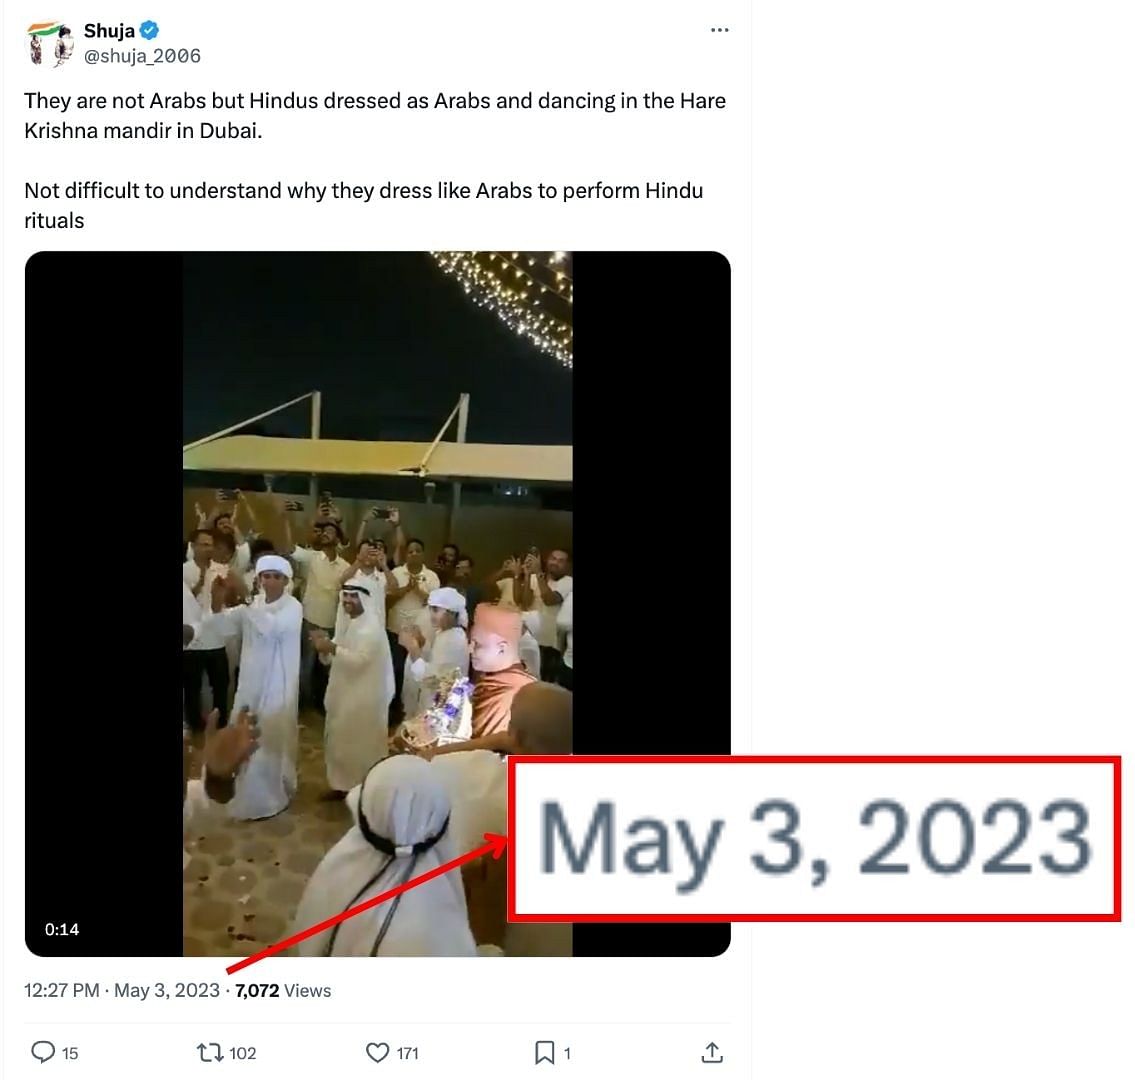 The video has been on the internet since 2 May 2023 and has no connection to the BAPS Hindu Mandir in Abu Dhabi, UAE